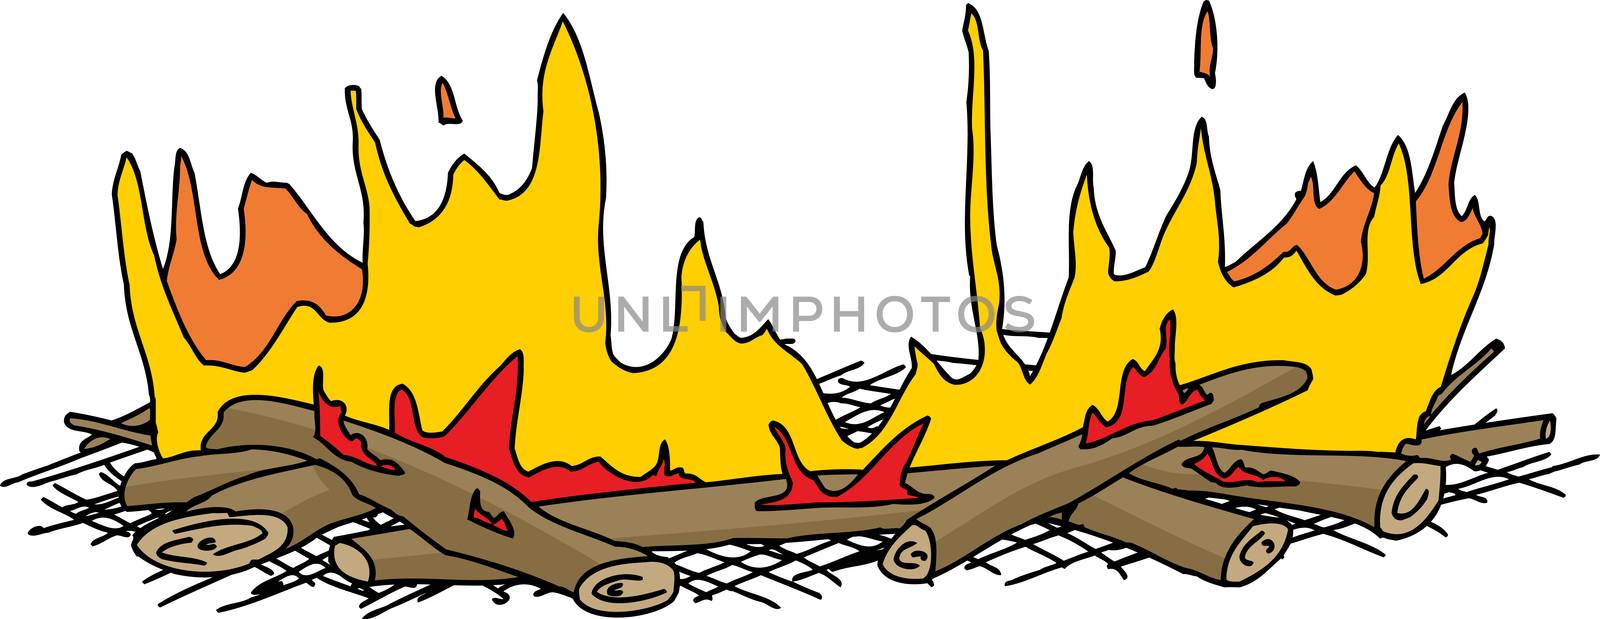 Isolated hand drawn cartoon campfire over white